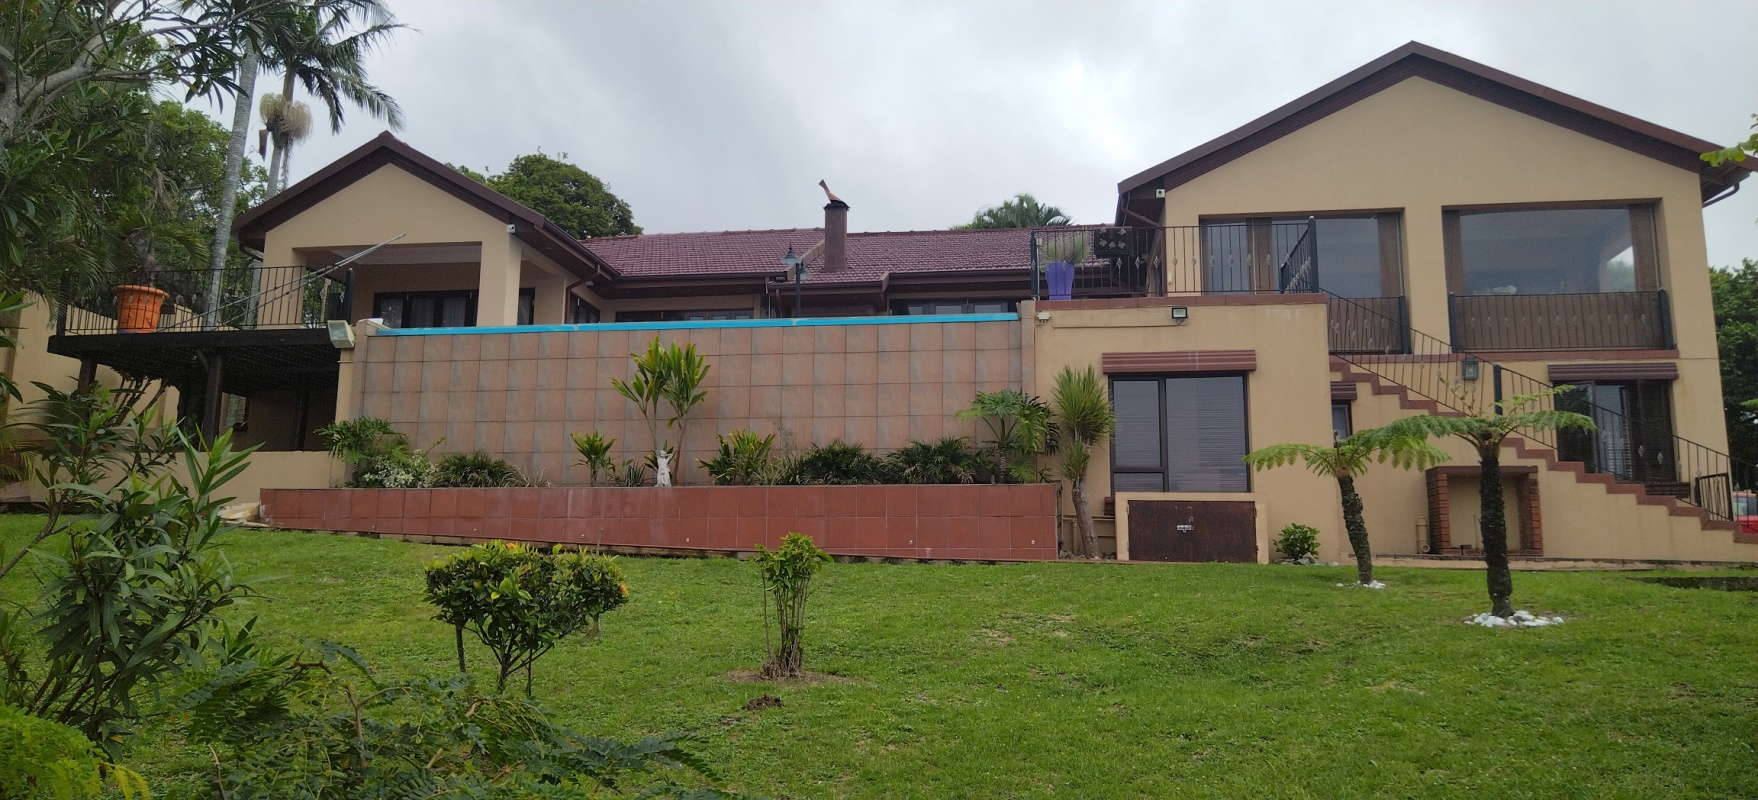 6 Bedroom House  For Sale in Uvongo Beach | 1347756 | Property.CoZa